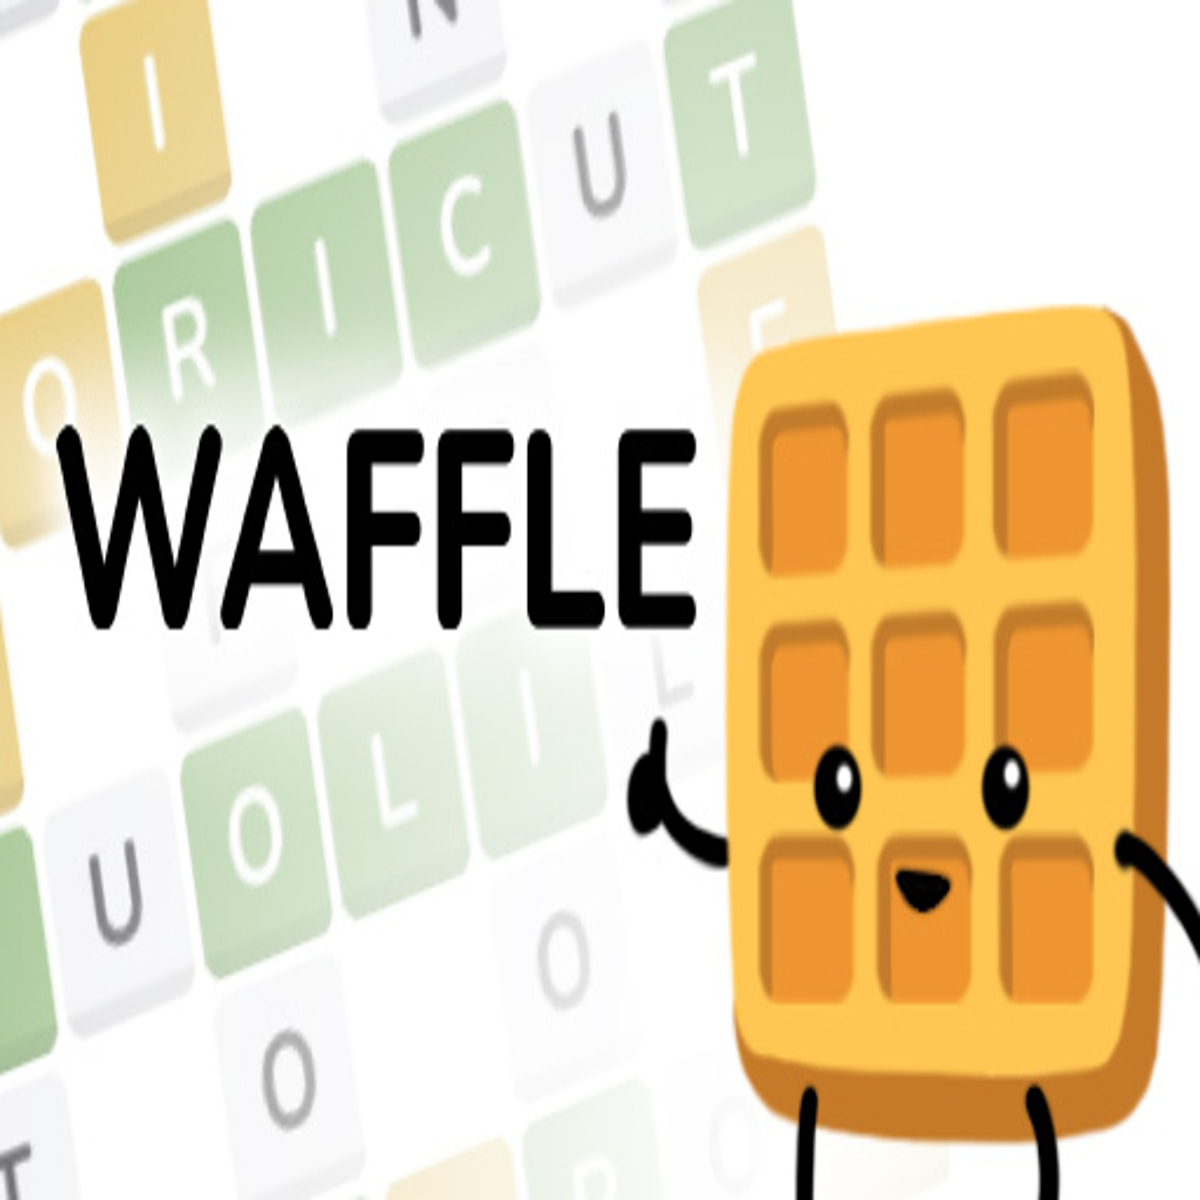 Waffle - daily word game